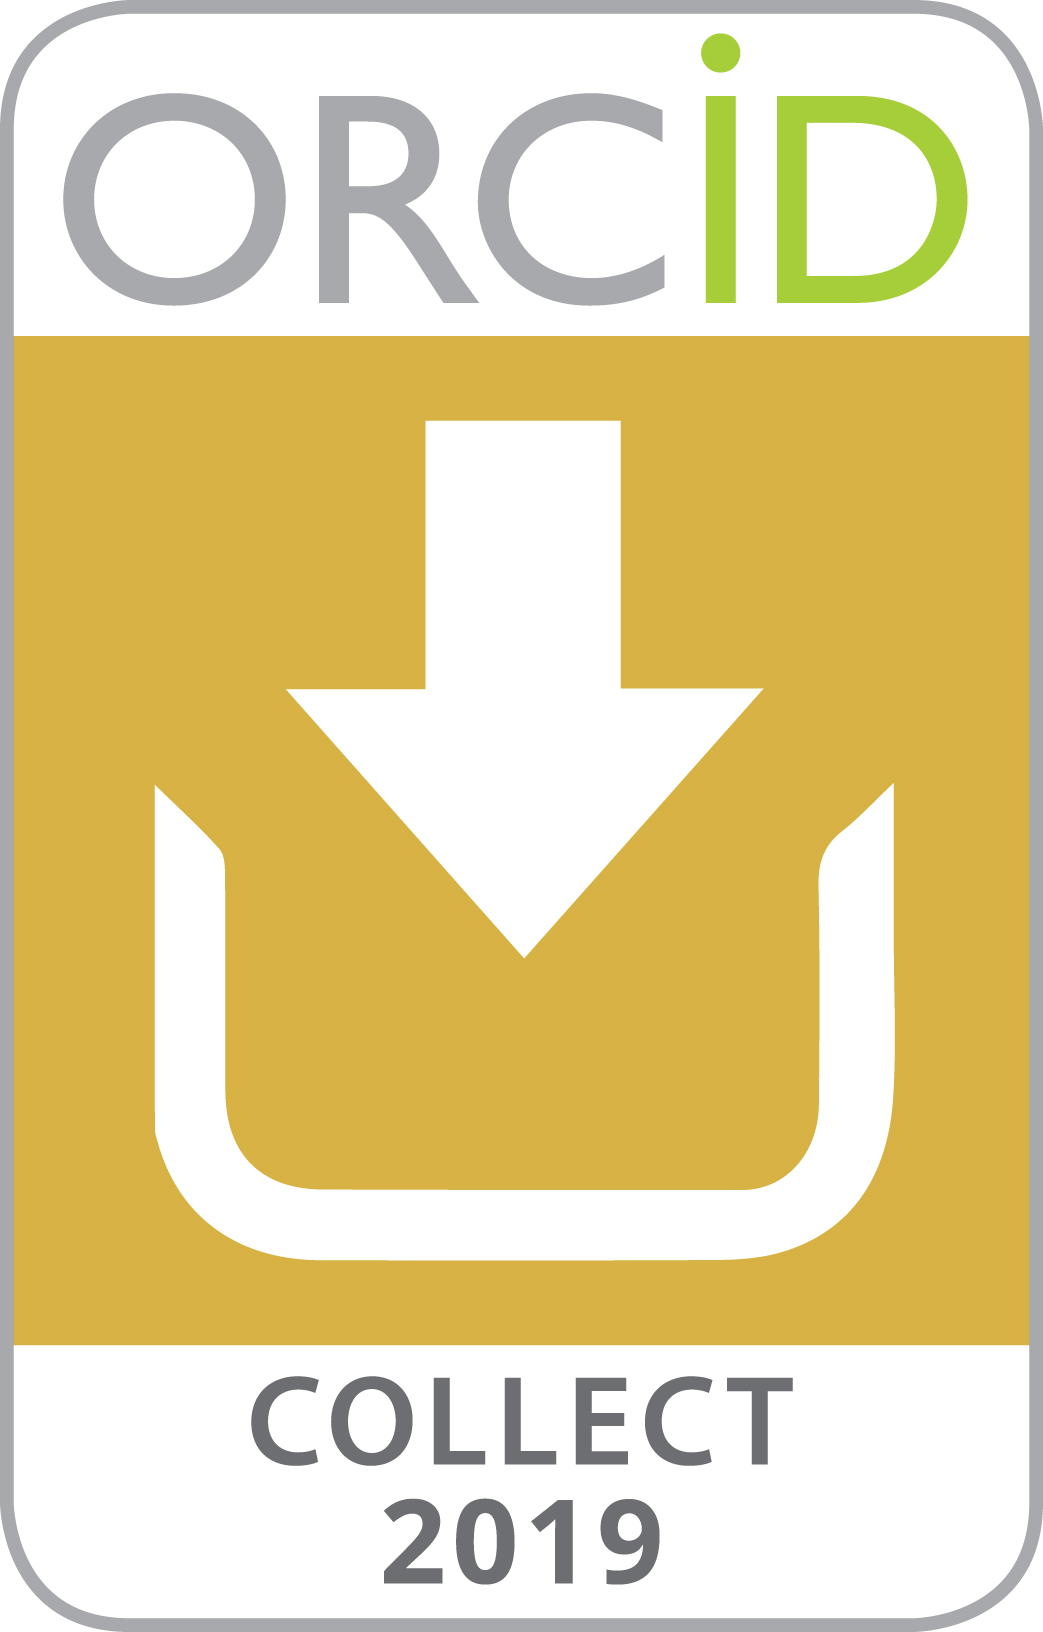 ORCID COLLECT Badge 2019